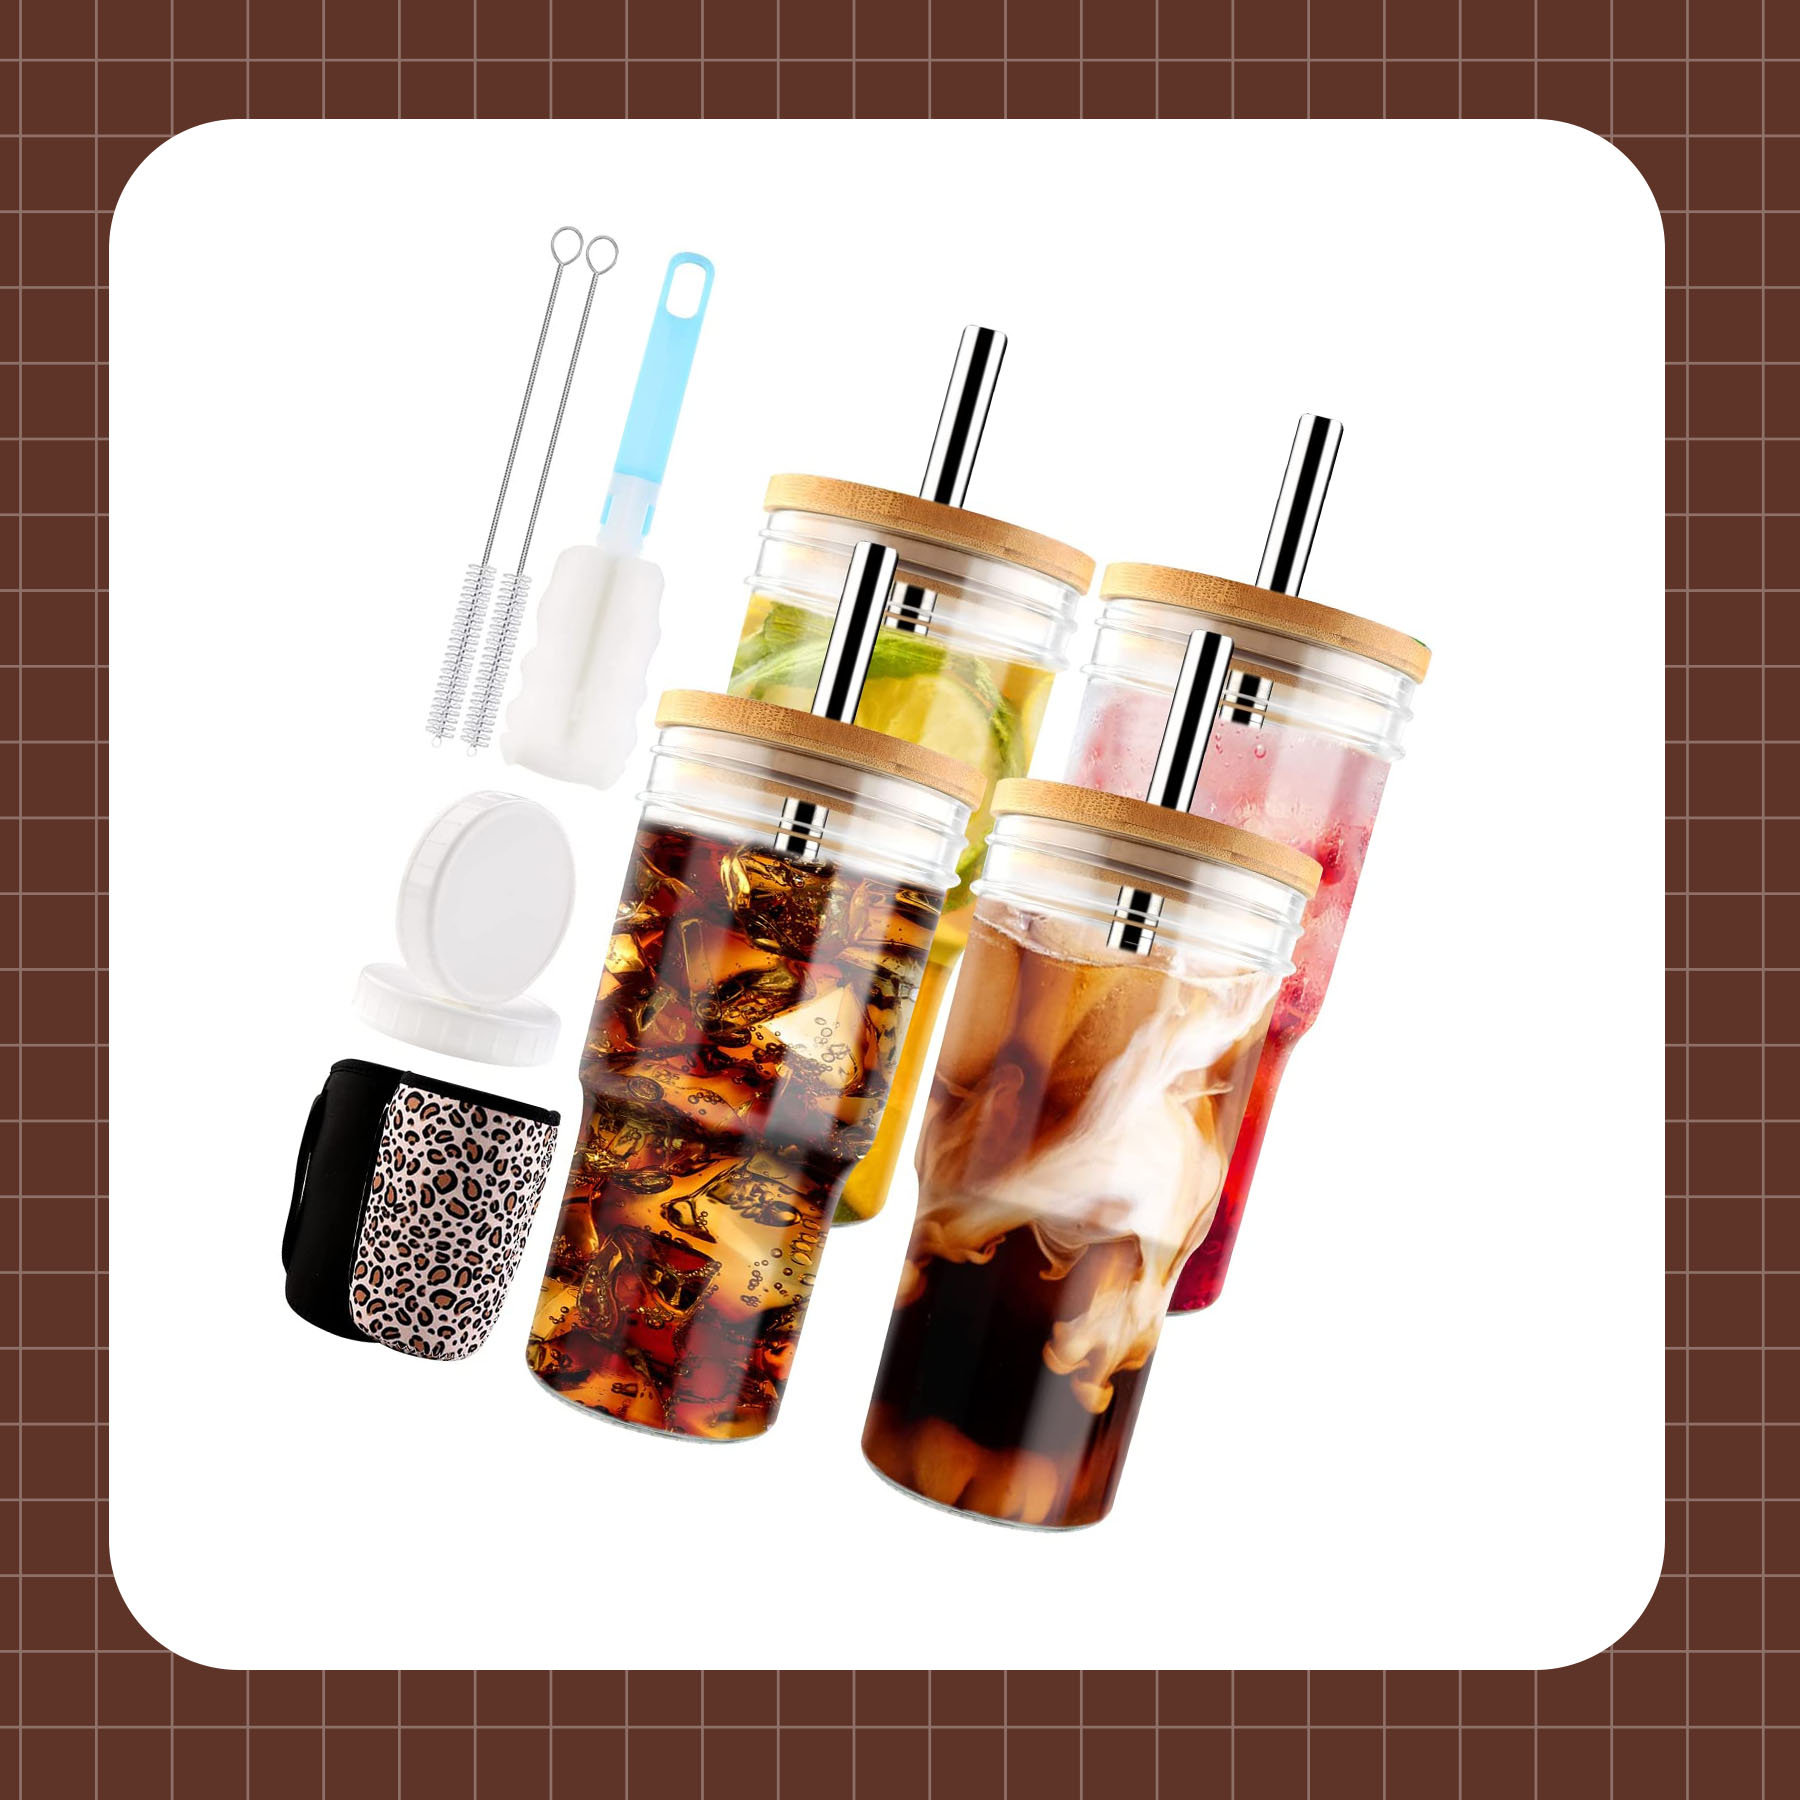 6-Piece Clear Mason Jars - 16 oz, Glass Drink Bottle with Lid and Straw,Frozen Juice Cup,Travel Mug Rosalind Wheeler